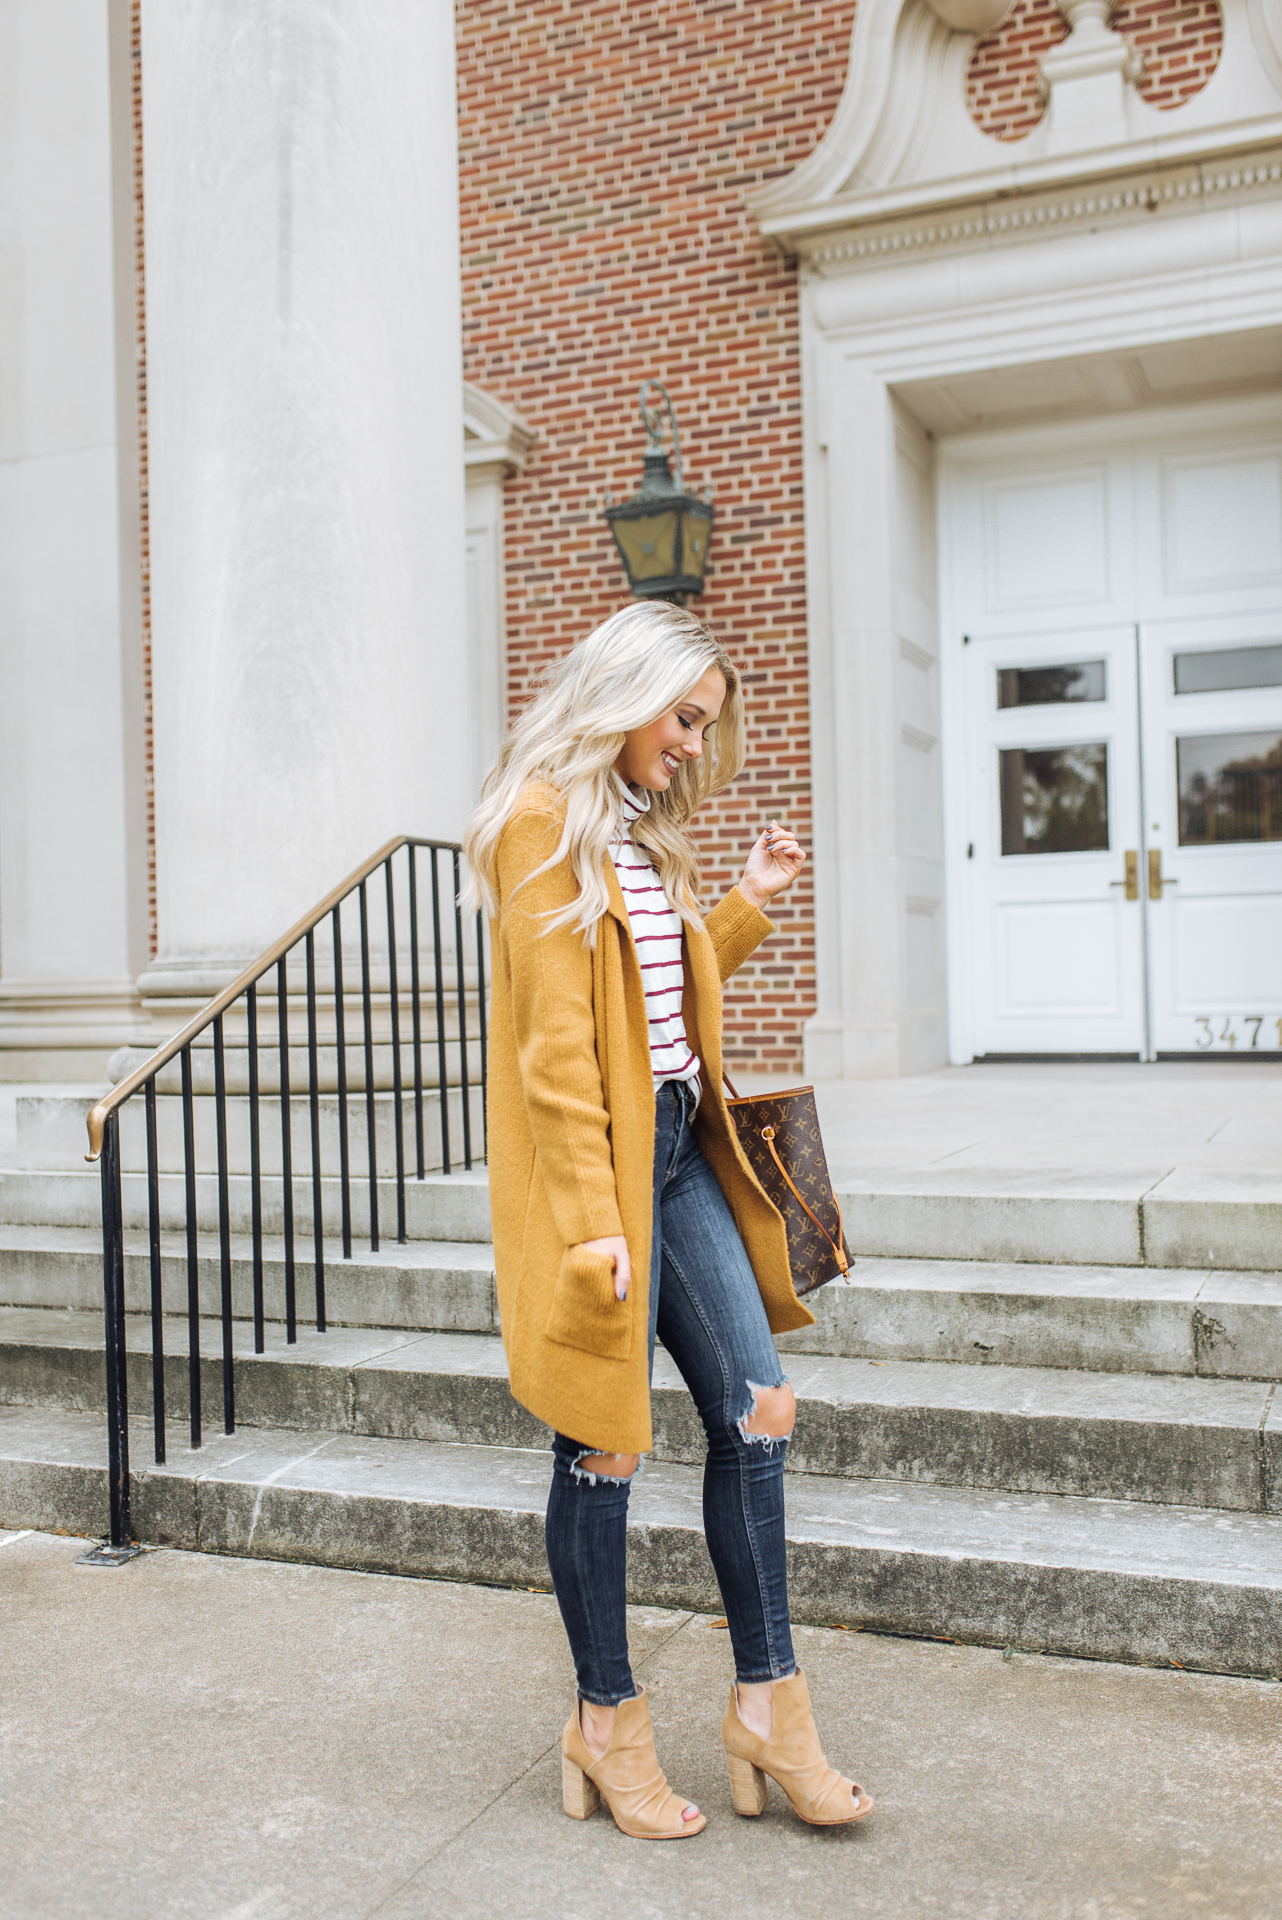 Striped Tee and Cardigan – Champagne & Chanel